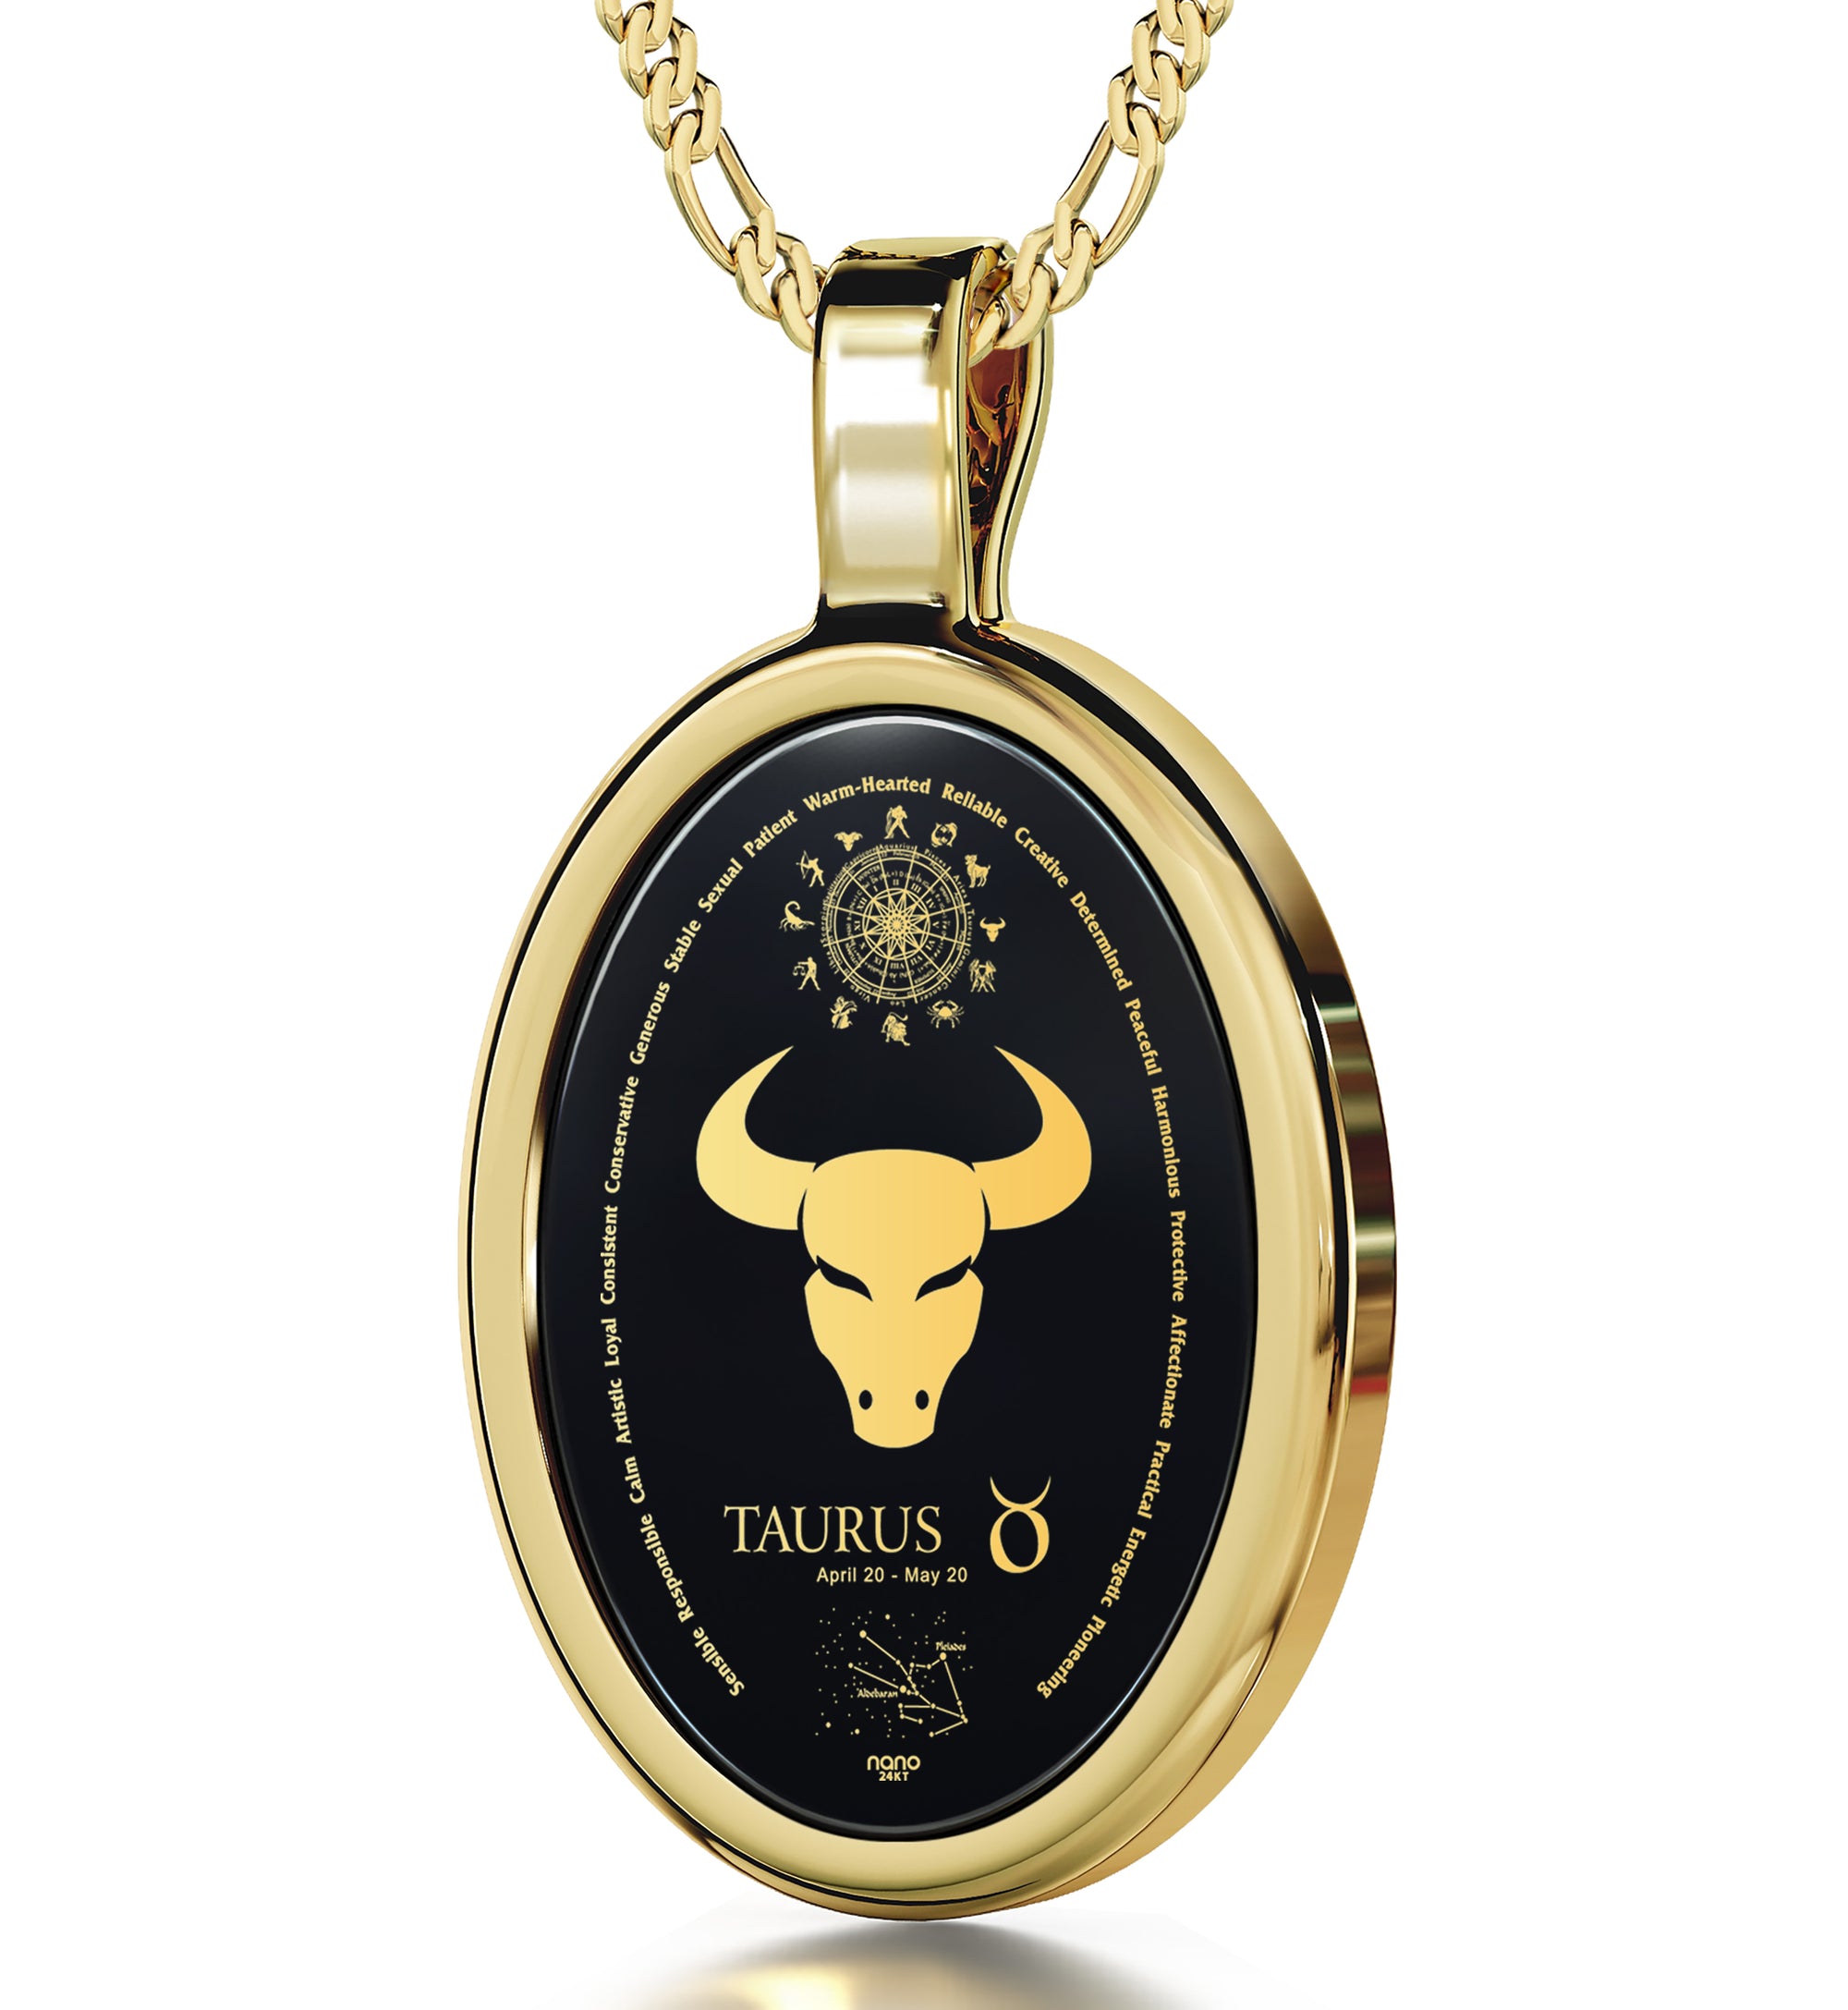 Unique Taurus Necklace Zodiac Pendant from NanoStyle a Her Gift Jewelry | - the Give Stars